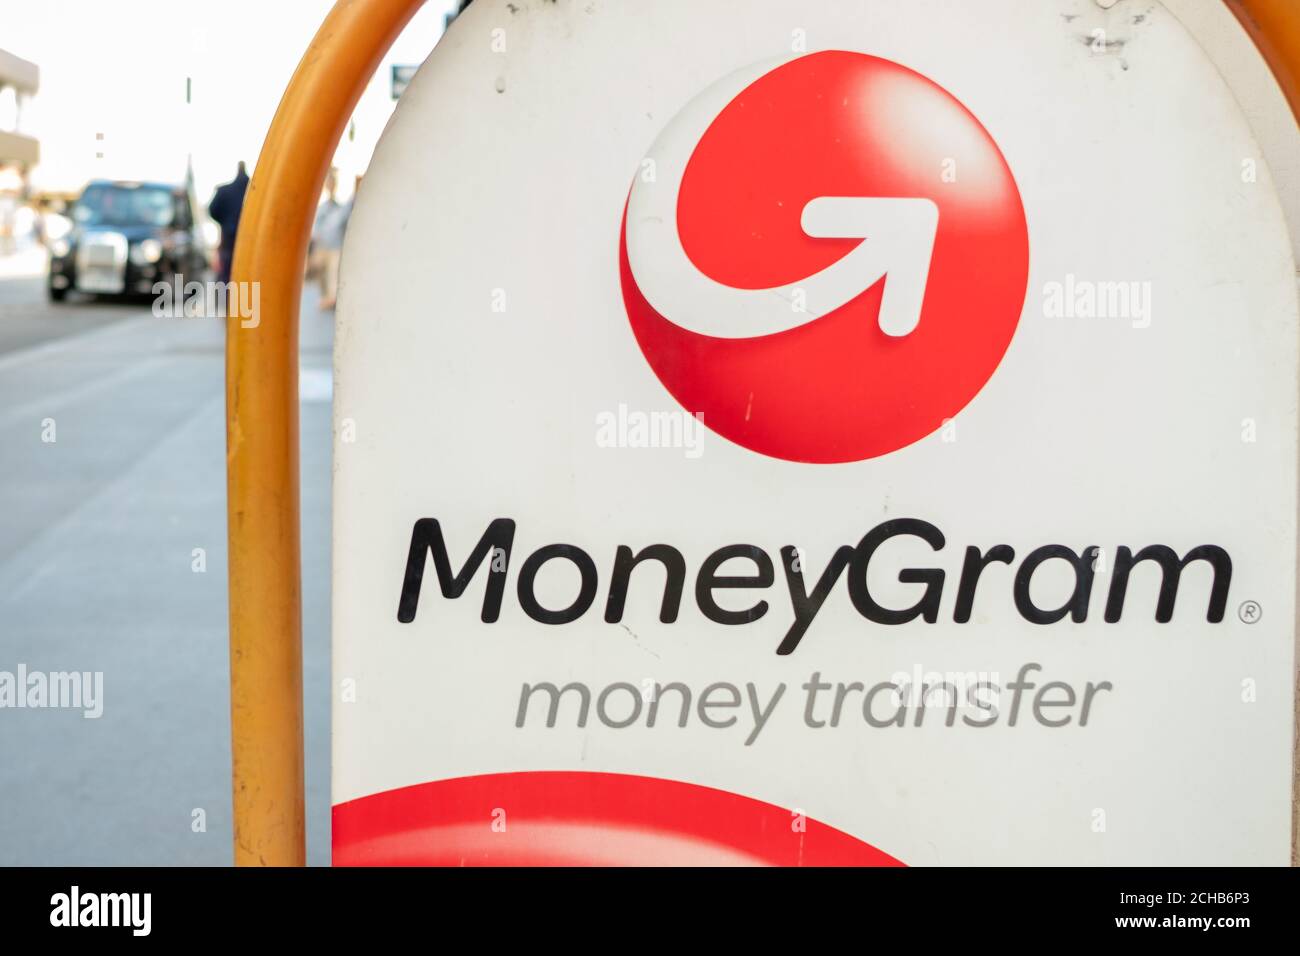 London- September 2020: Moneygram sign on London street, a financial services company specialising in the transfer of money Stock Photo